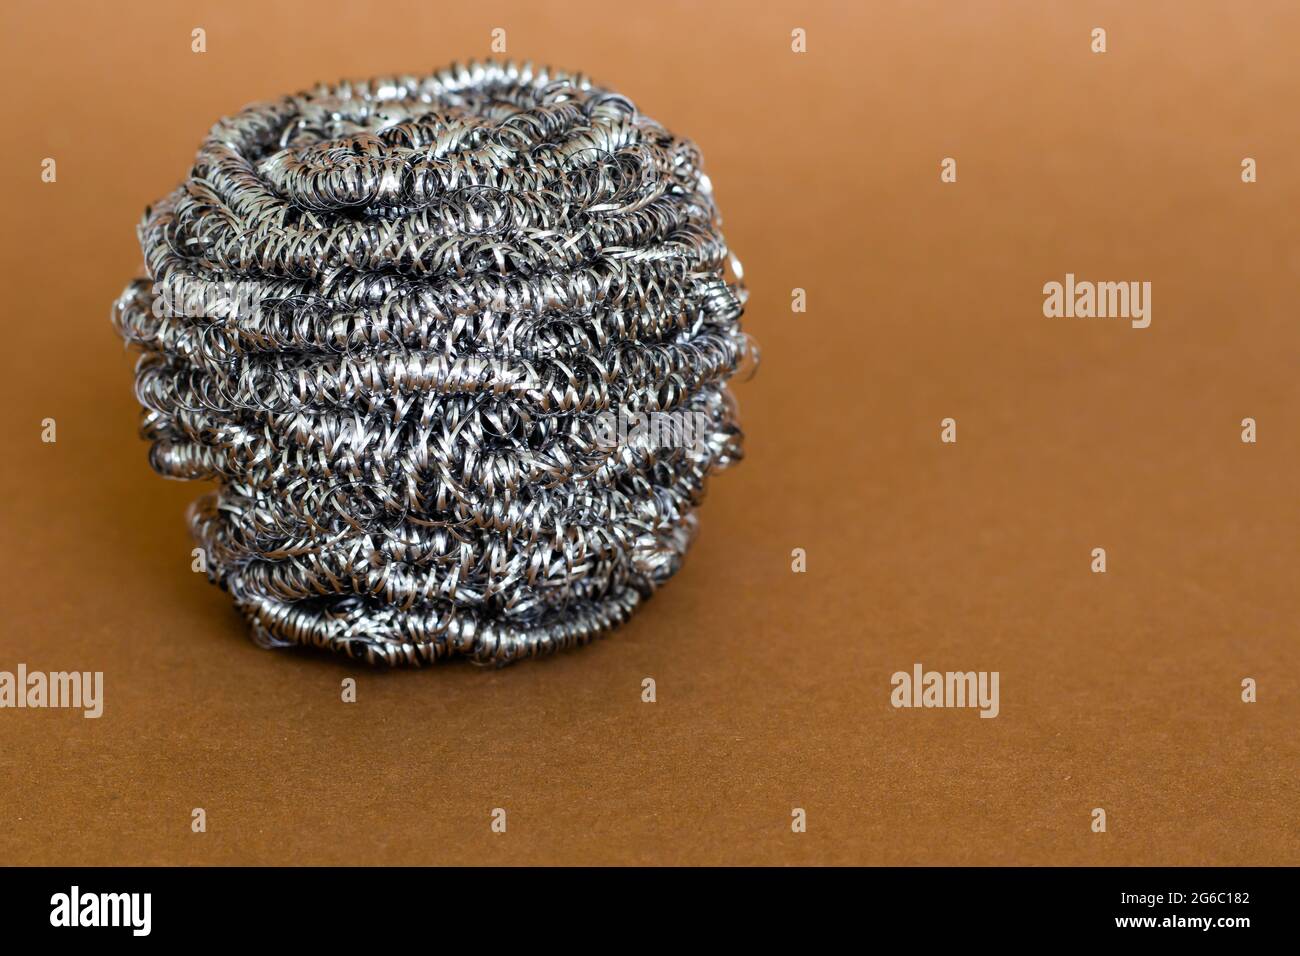 Stainless steel pot scrubber standout on brown background, copy space Stock  Photo - Alamy